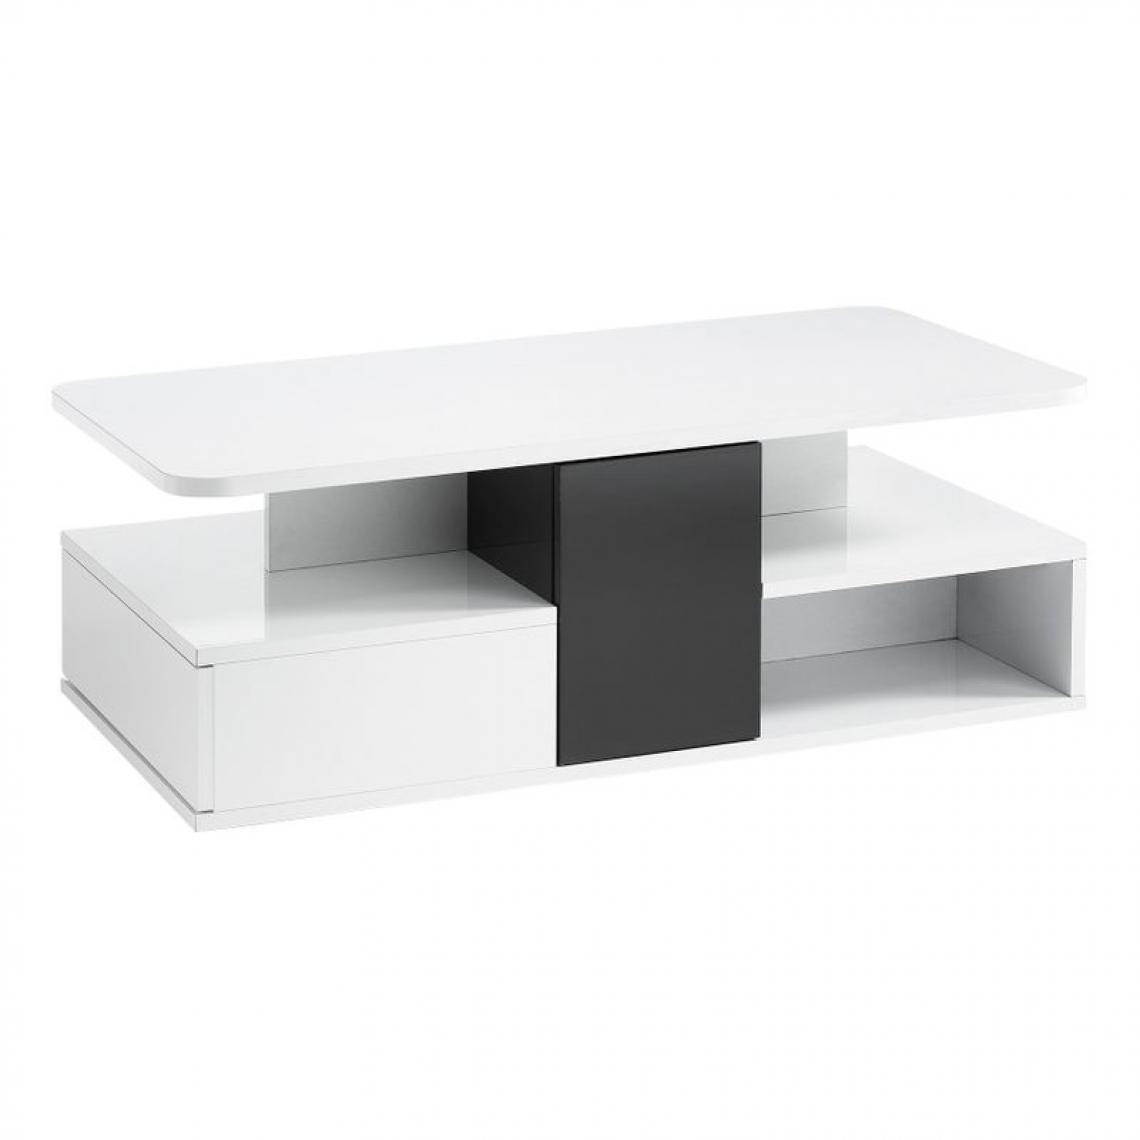 Modern Living - Table basse BELLARIVA laqué blanc/ gris anthracite - Tables basses